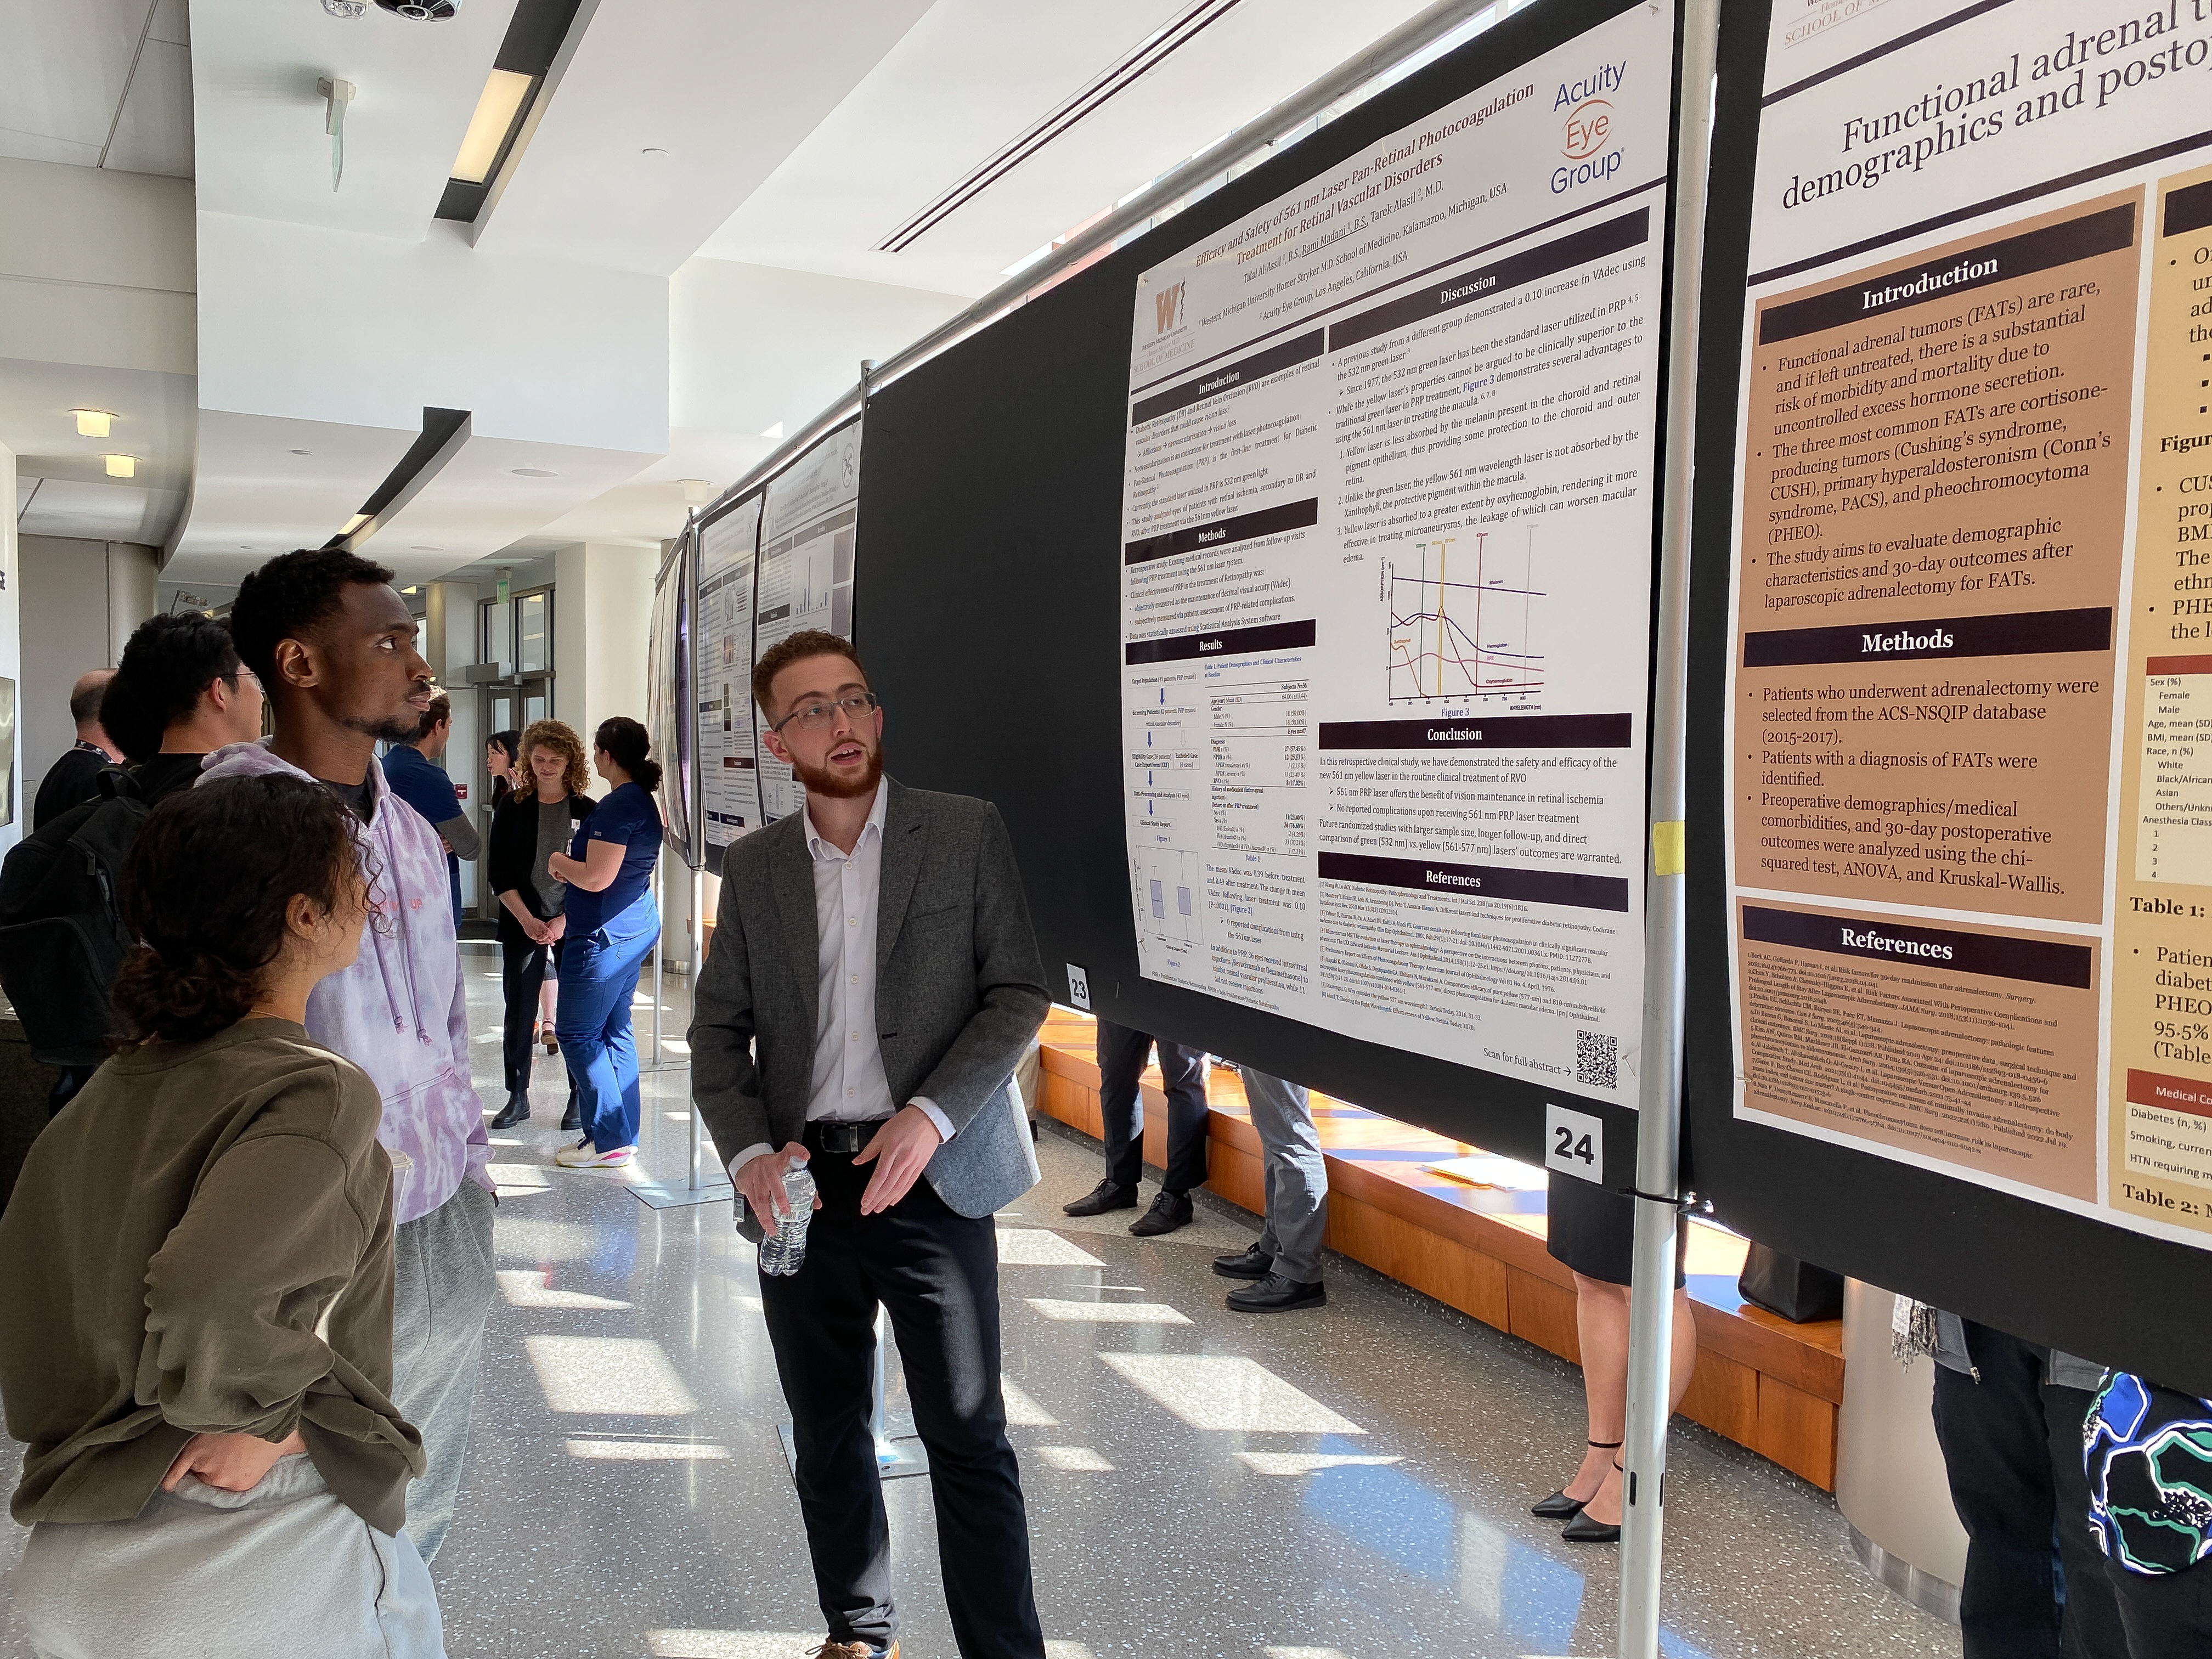 The 41st Annual Kalamazoo Community Medical and Health Sciences Research Day was held on May 3 and 4 at the W.E. Upjohn M.D. Campus in downtown Kalamazoo.